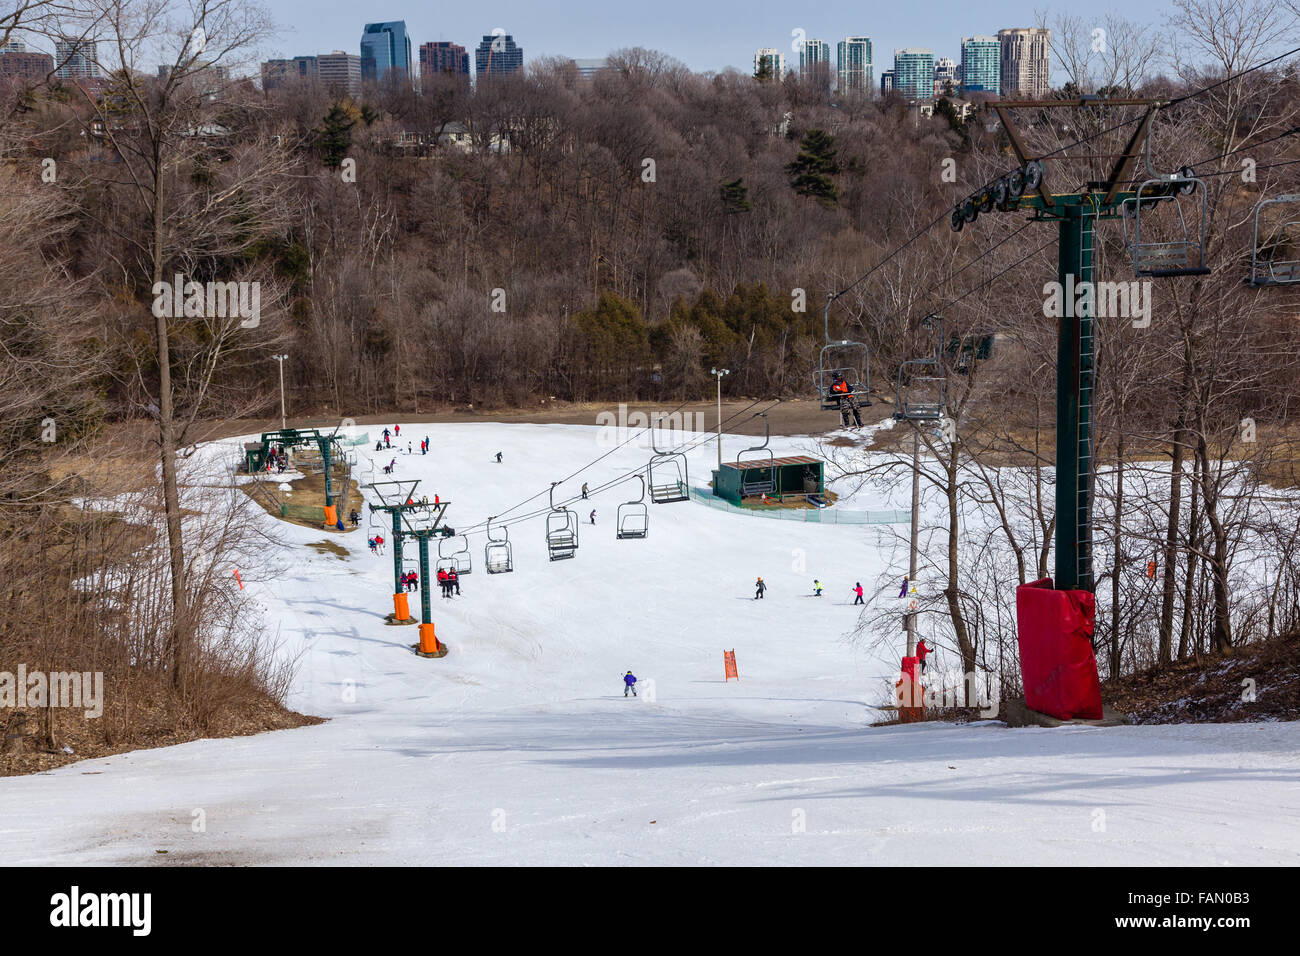 Ski Hill with chairlift at Earl Bales Ski and Snowboard Centre in Toronto. Stock Photo